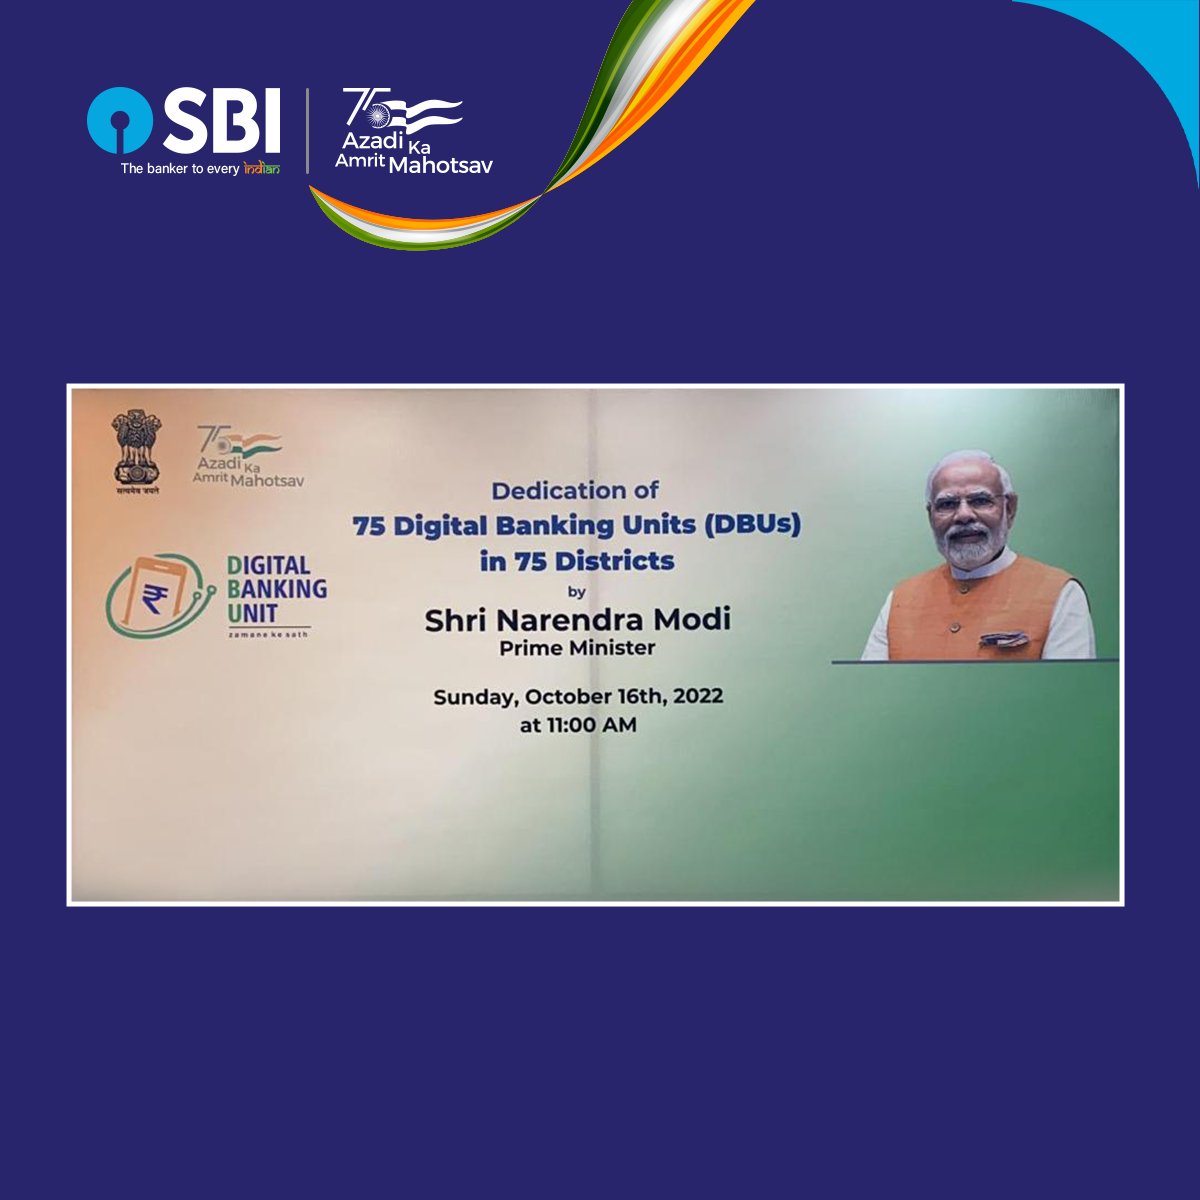 We are pleased to announce that Hon. PM Shri Narendra Modi has today inaugurated our 12 #DigitalBankingUnits (DBUs) out of the 75 DBUs in 75 different districts across the country. This will ensure that the benefits of digital banking reach everyone.

#SBI #AKAM